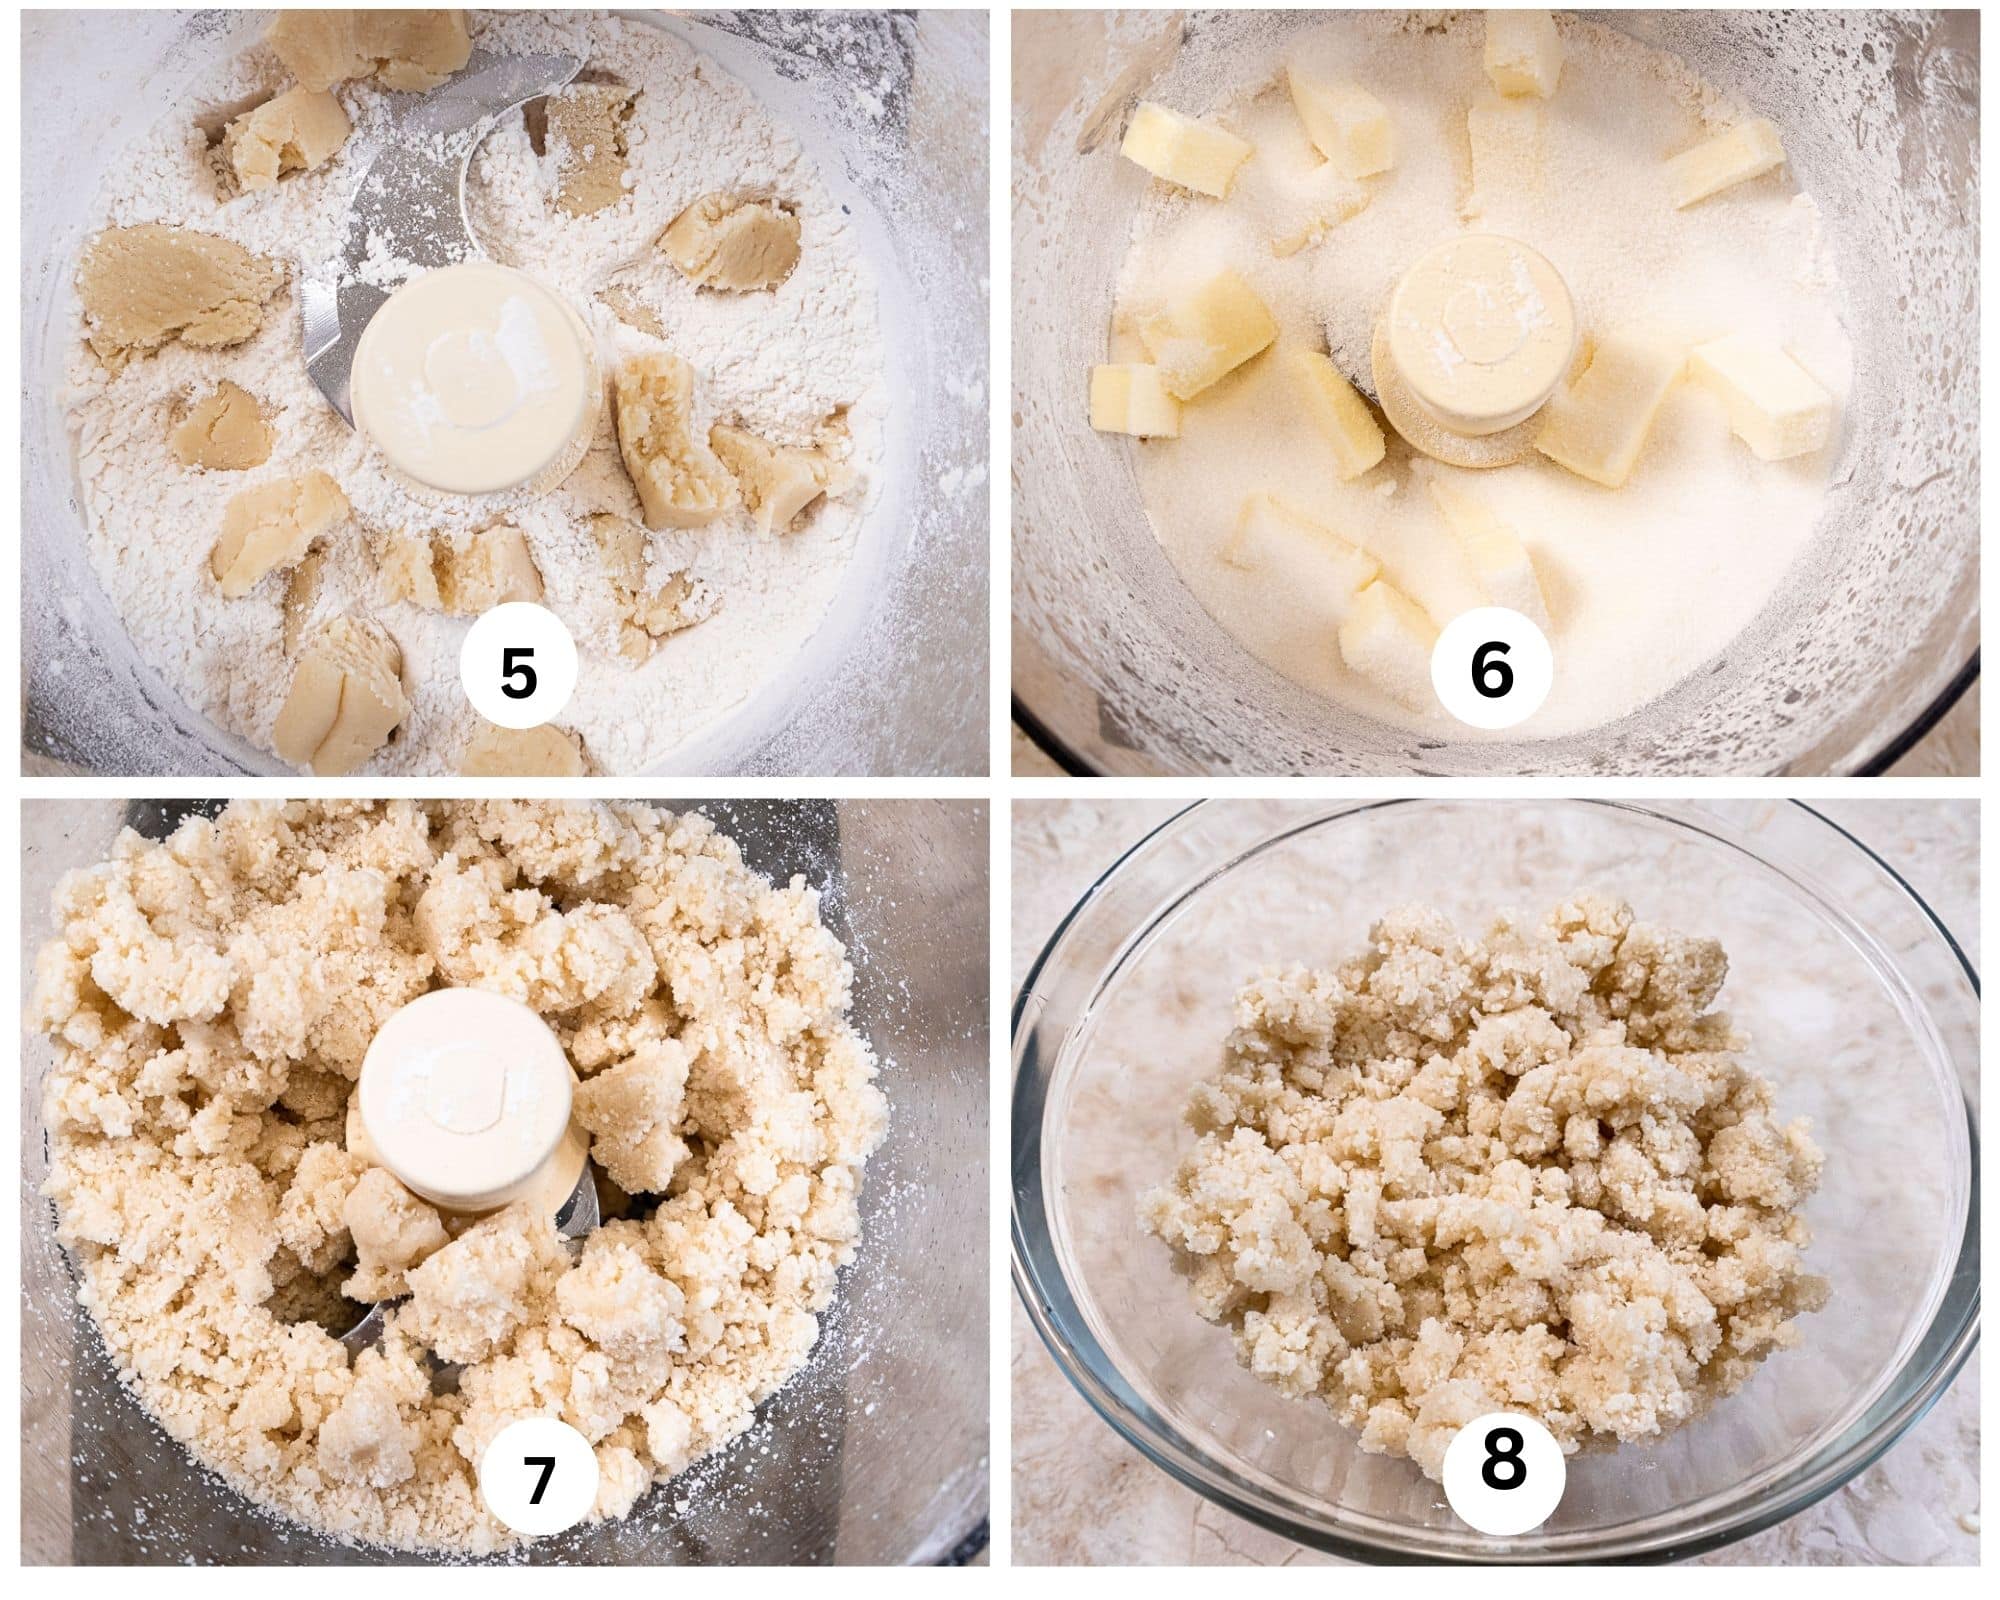 The second collage shows the almond paste over the flour in the bowl of a processor.